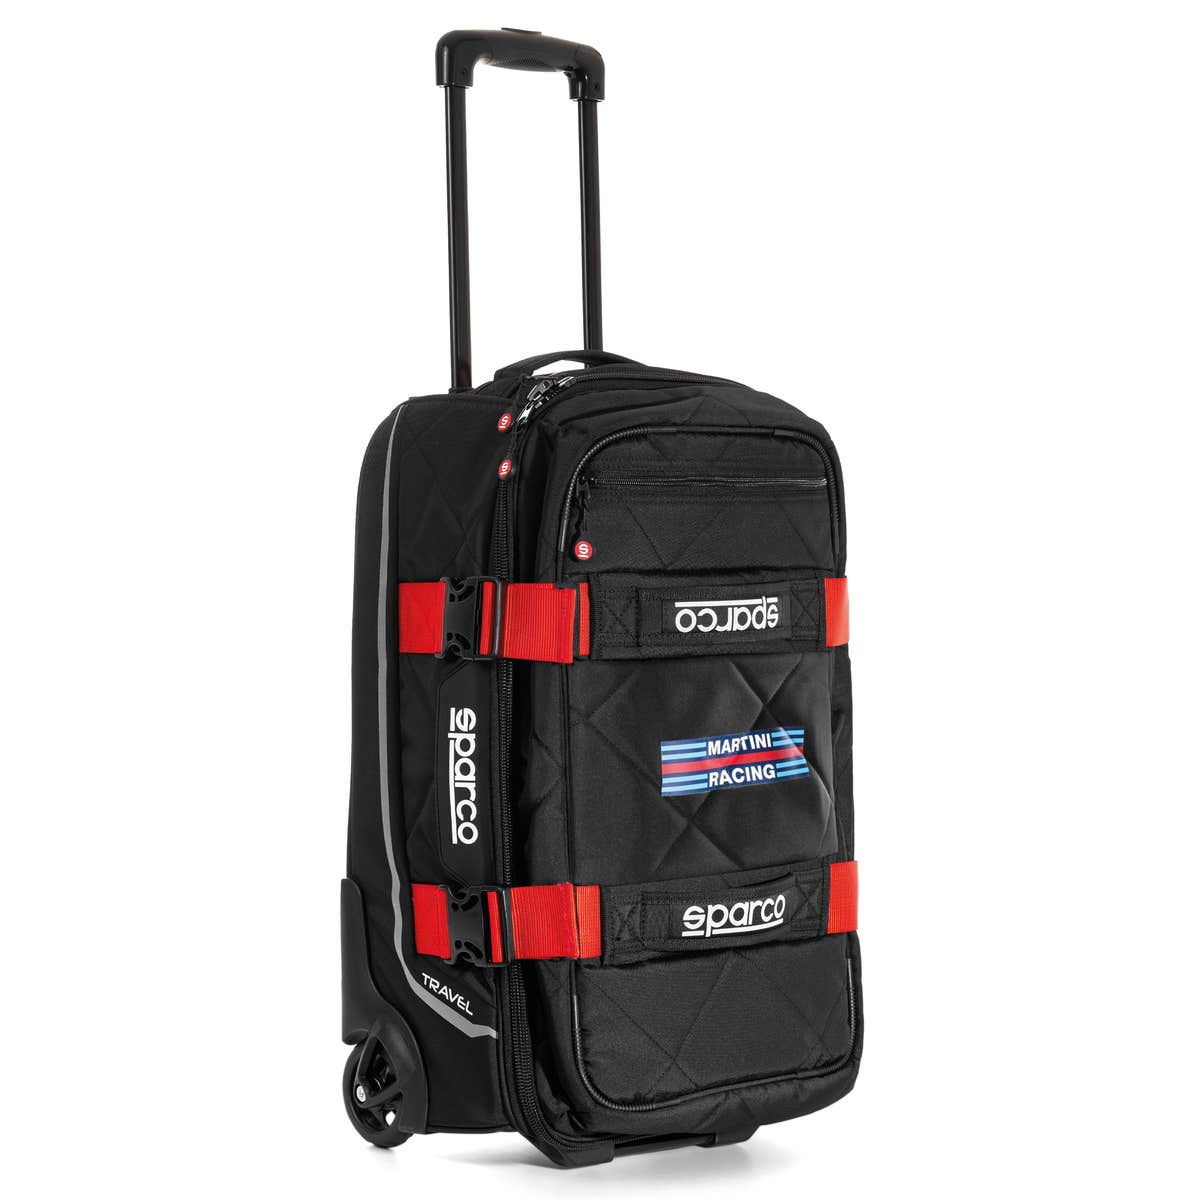 TRAVEL MARTINI RACING - Sparco Shop